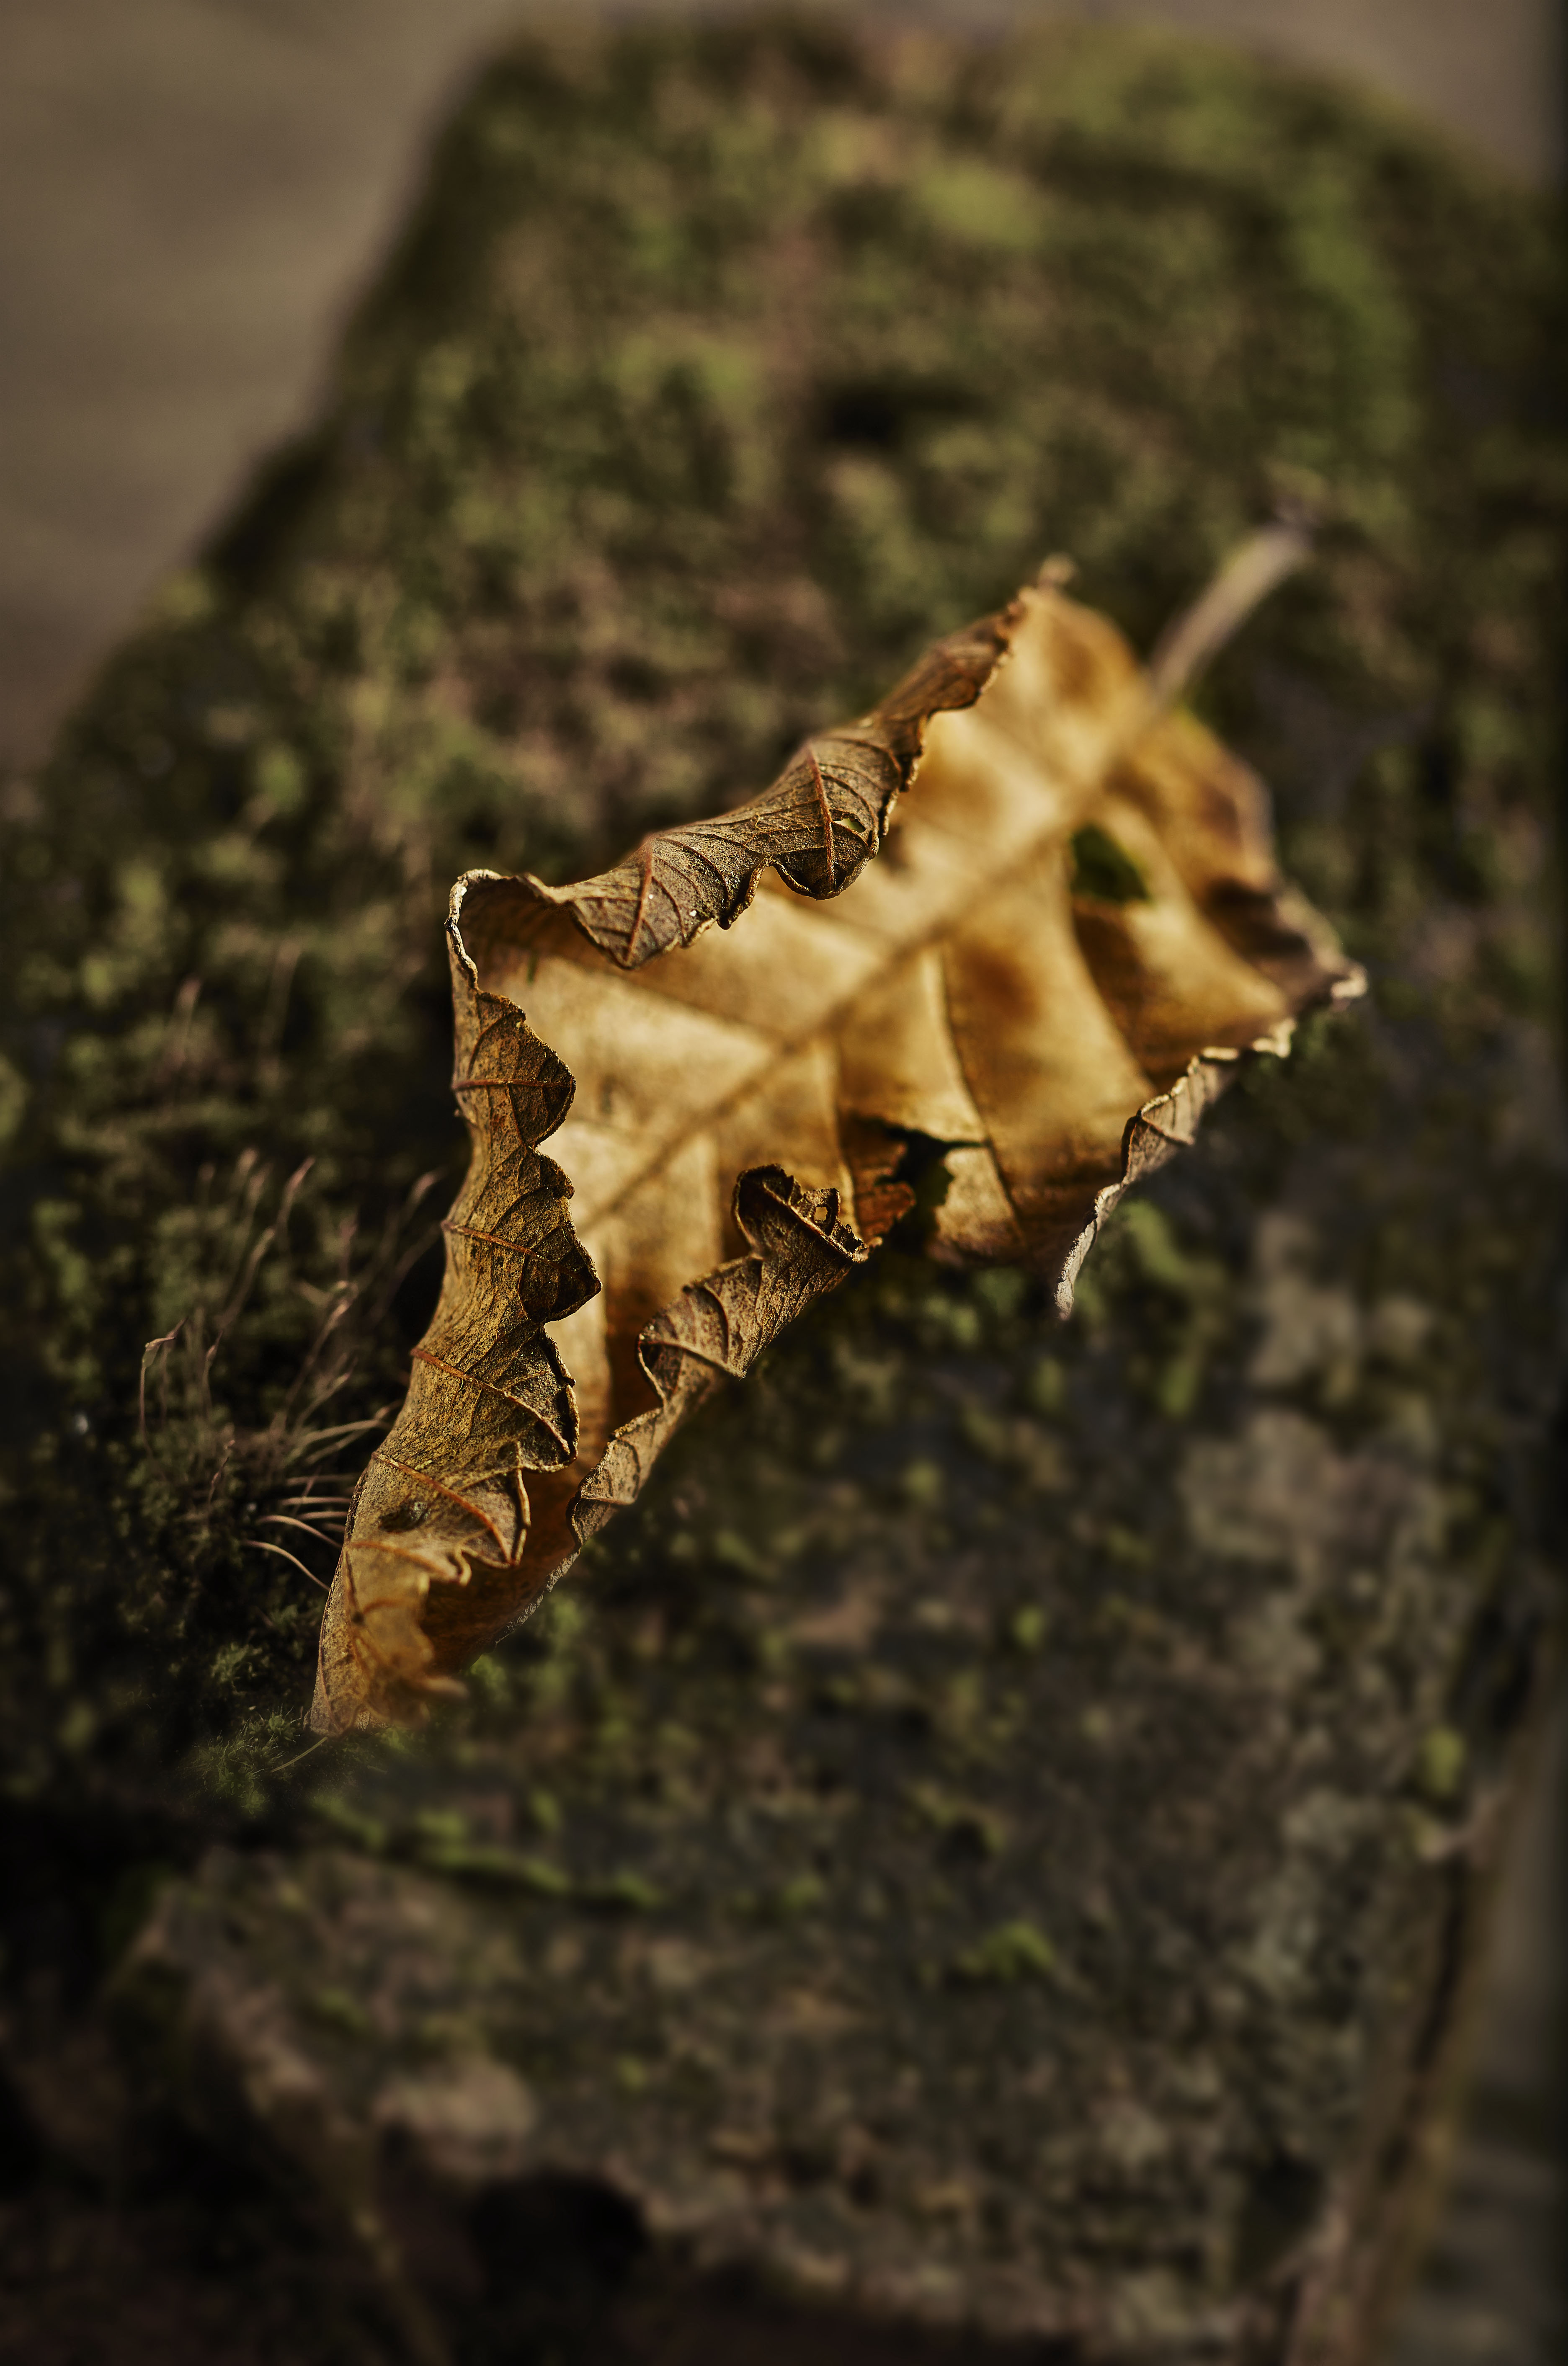 Low key photograph of a weathered leaf by Randy Allbritton